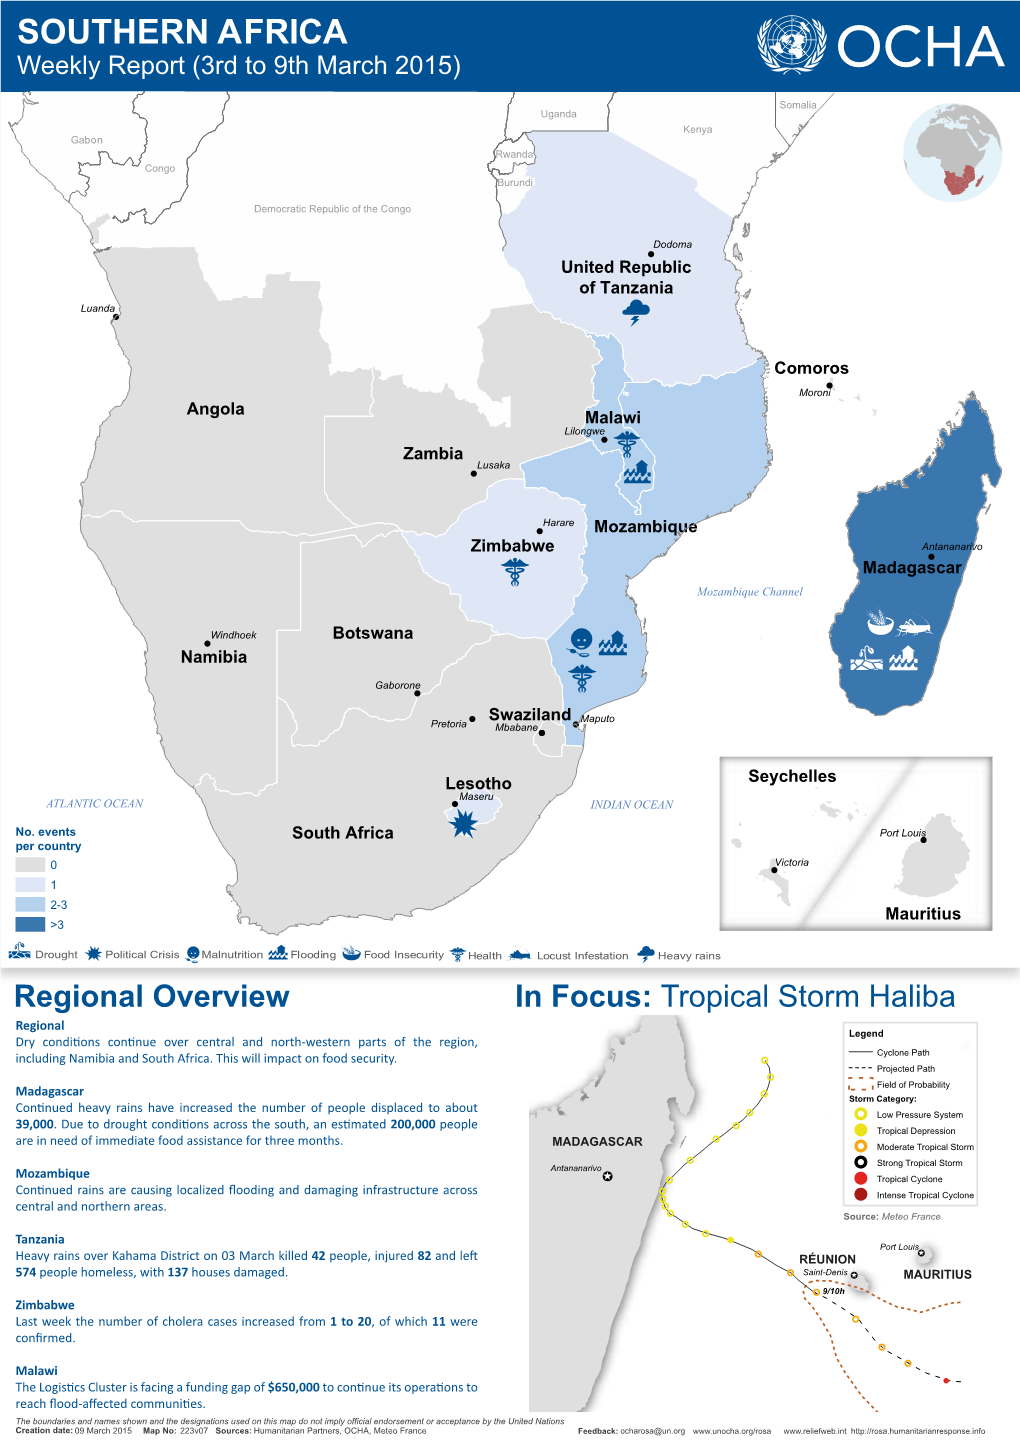 SOUTHERN AFRICA Weekly Report (3Rd to 9Th March 2015)